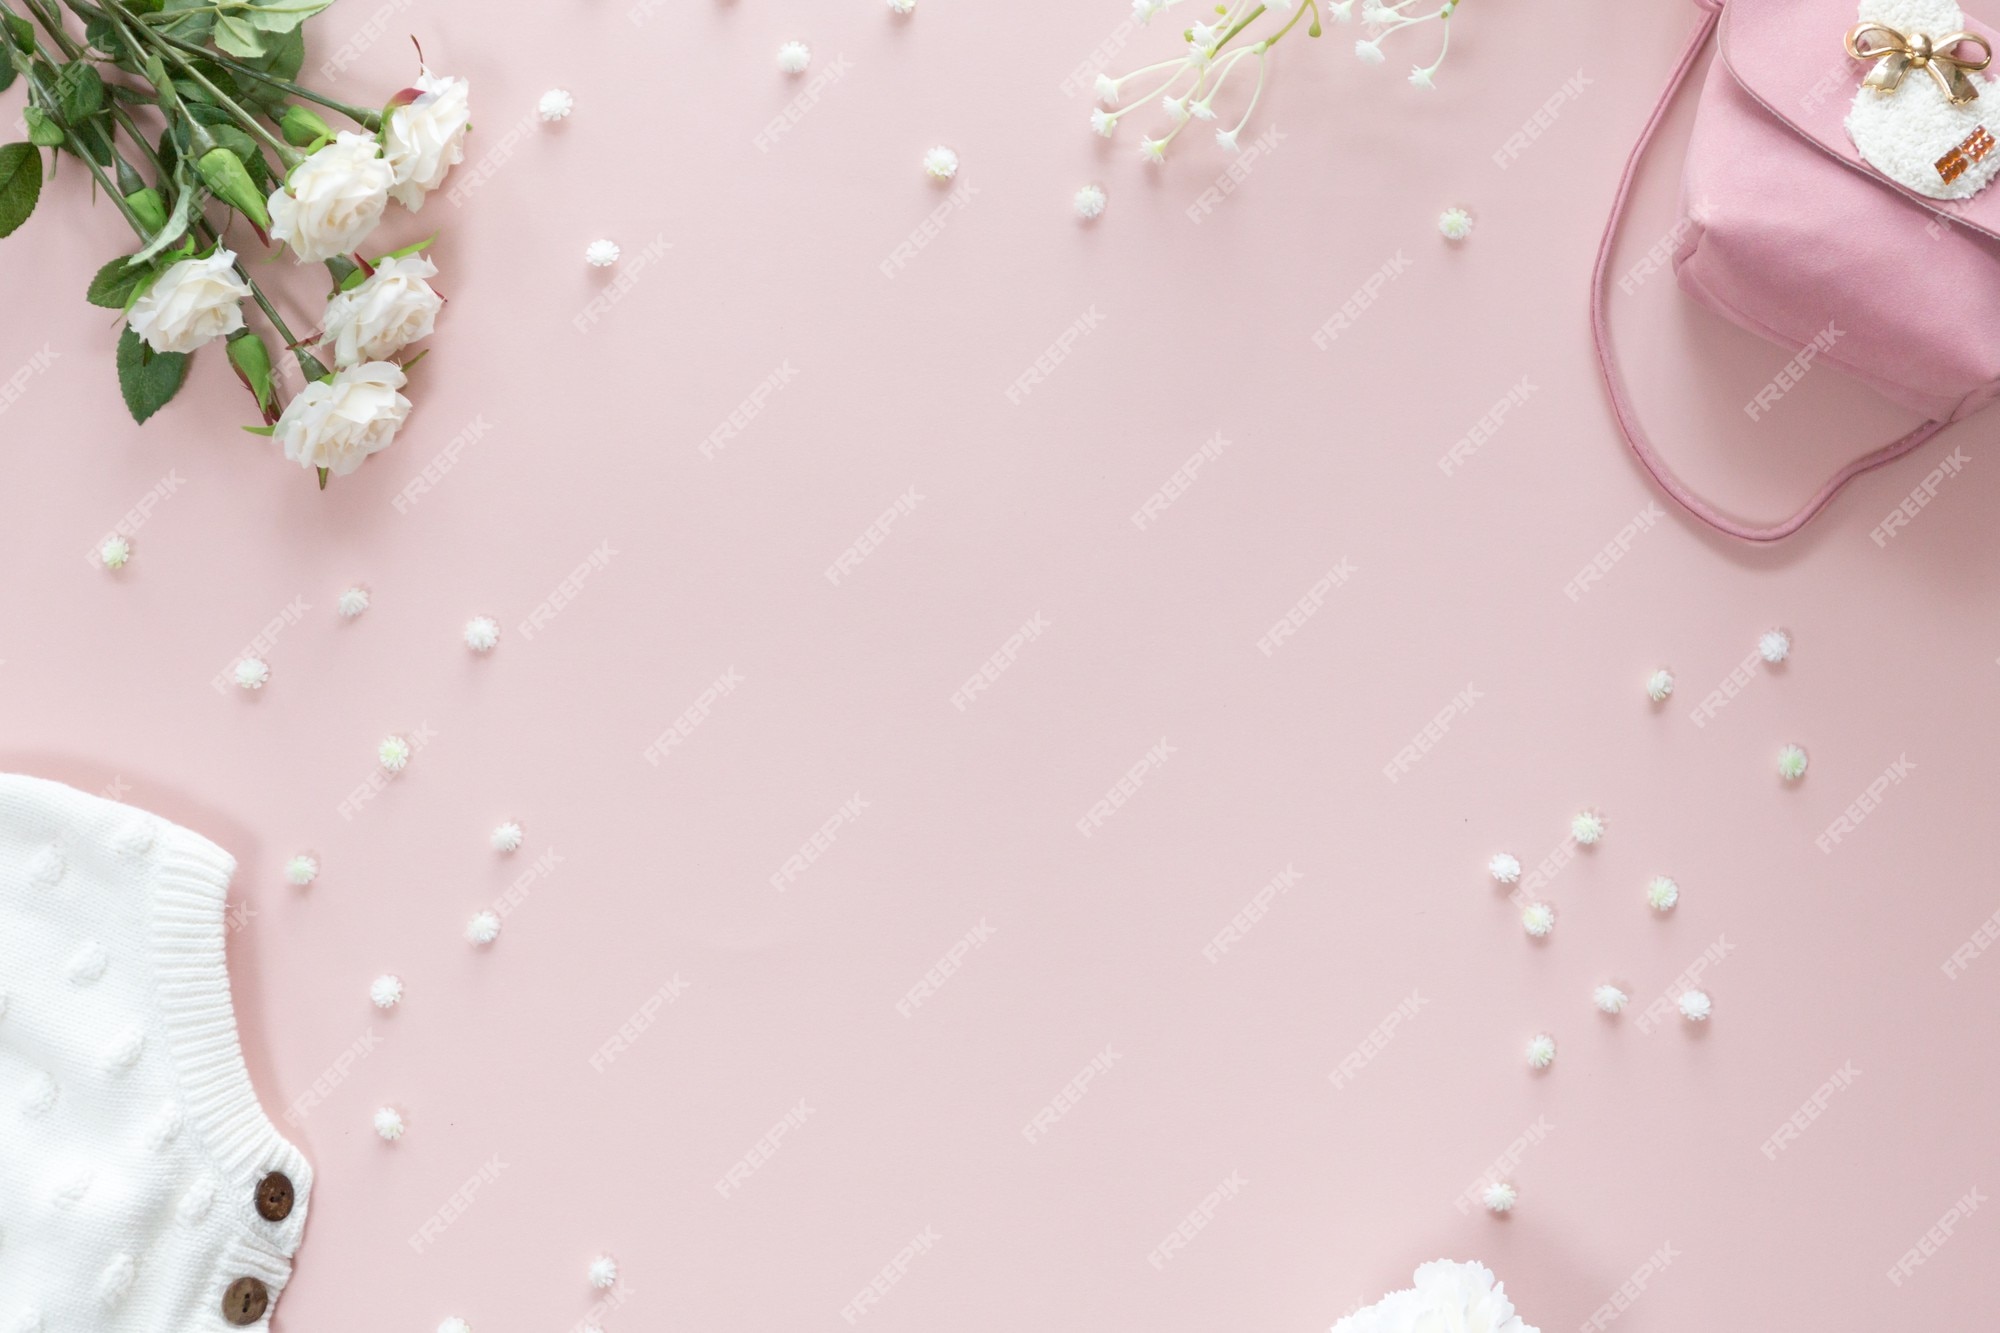 Premium Photo | Baby shower flower background with baby girl accessories on  pink background with copy space for text, top view, flat lay